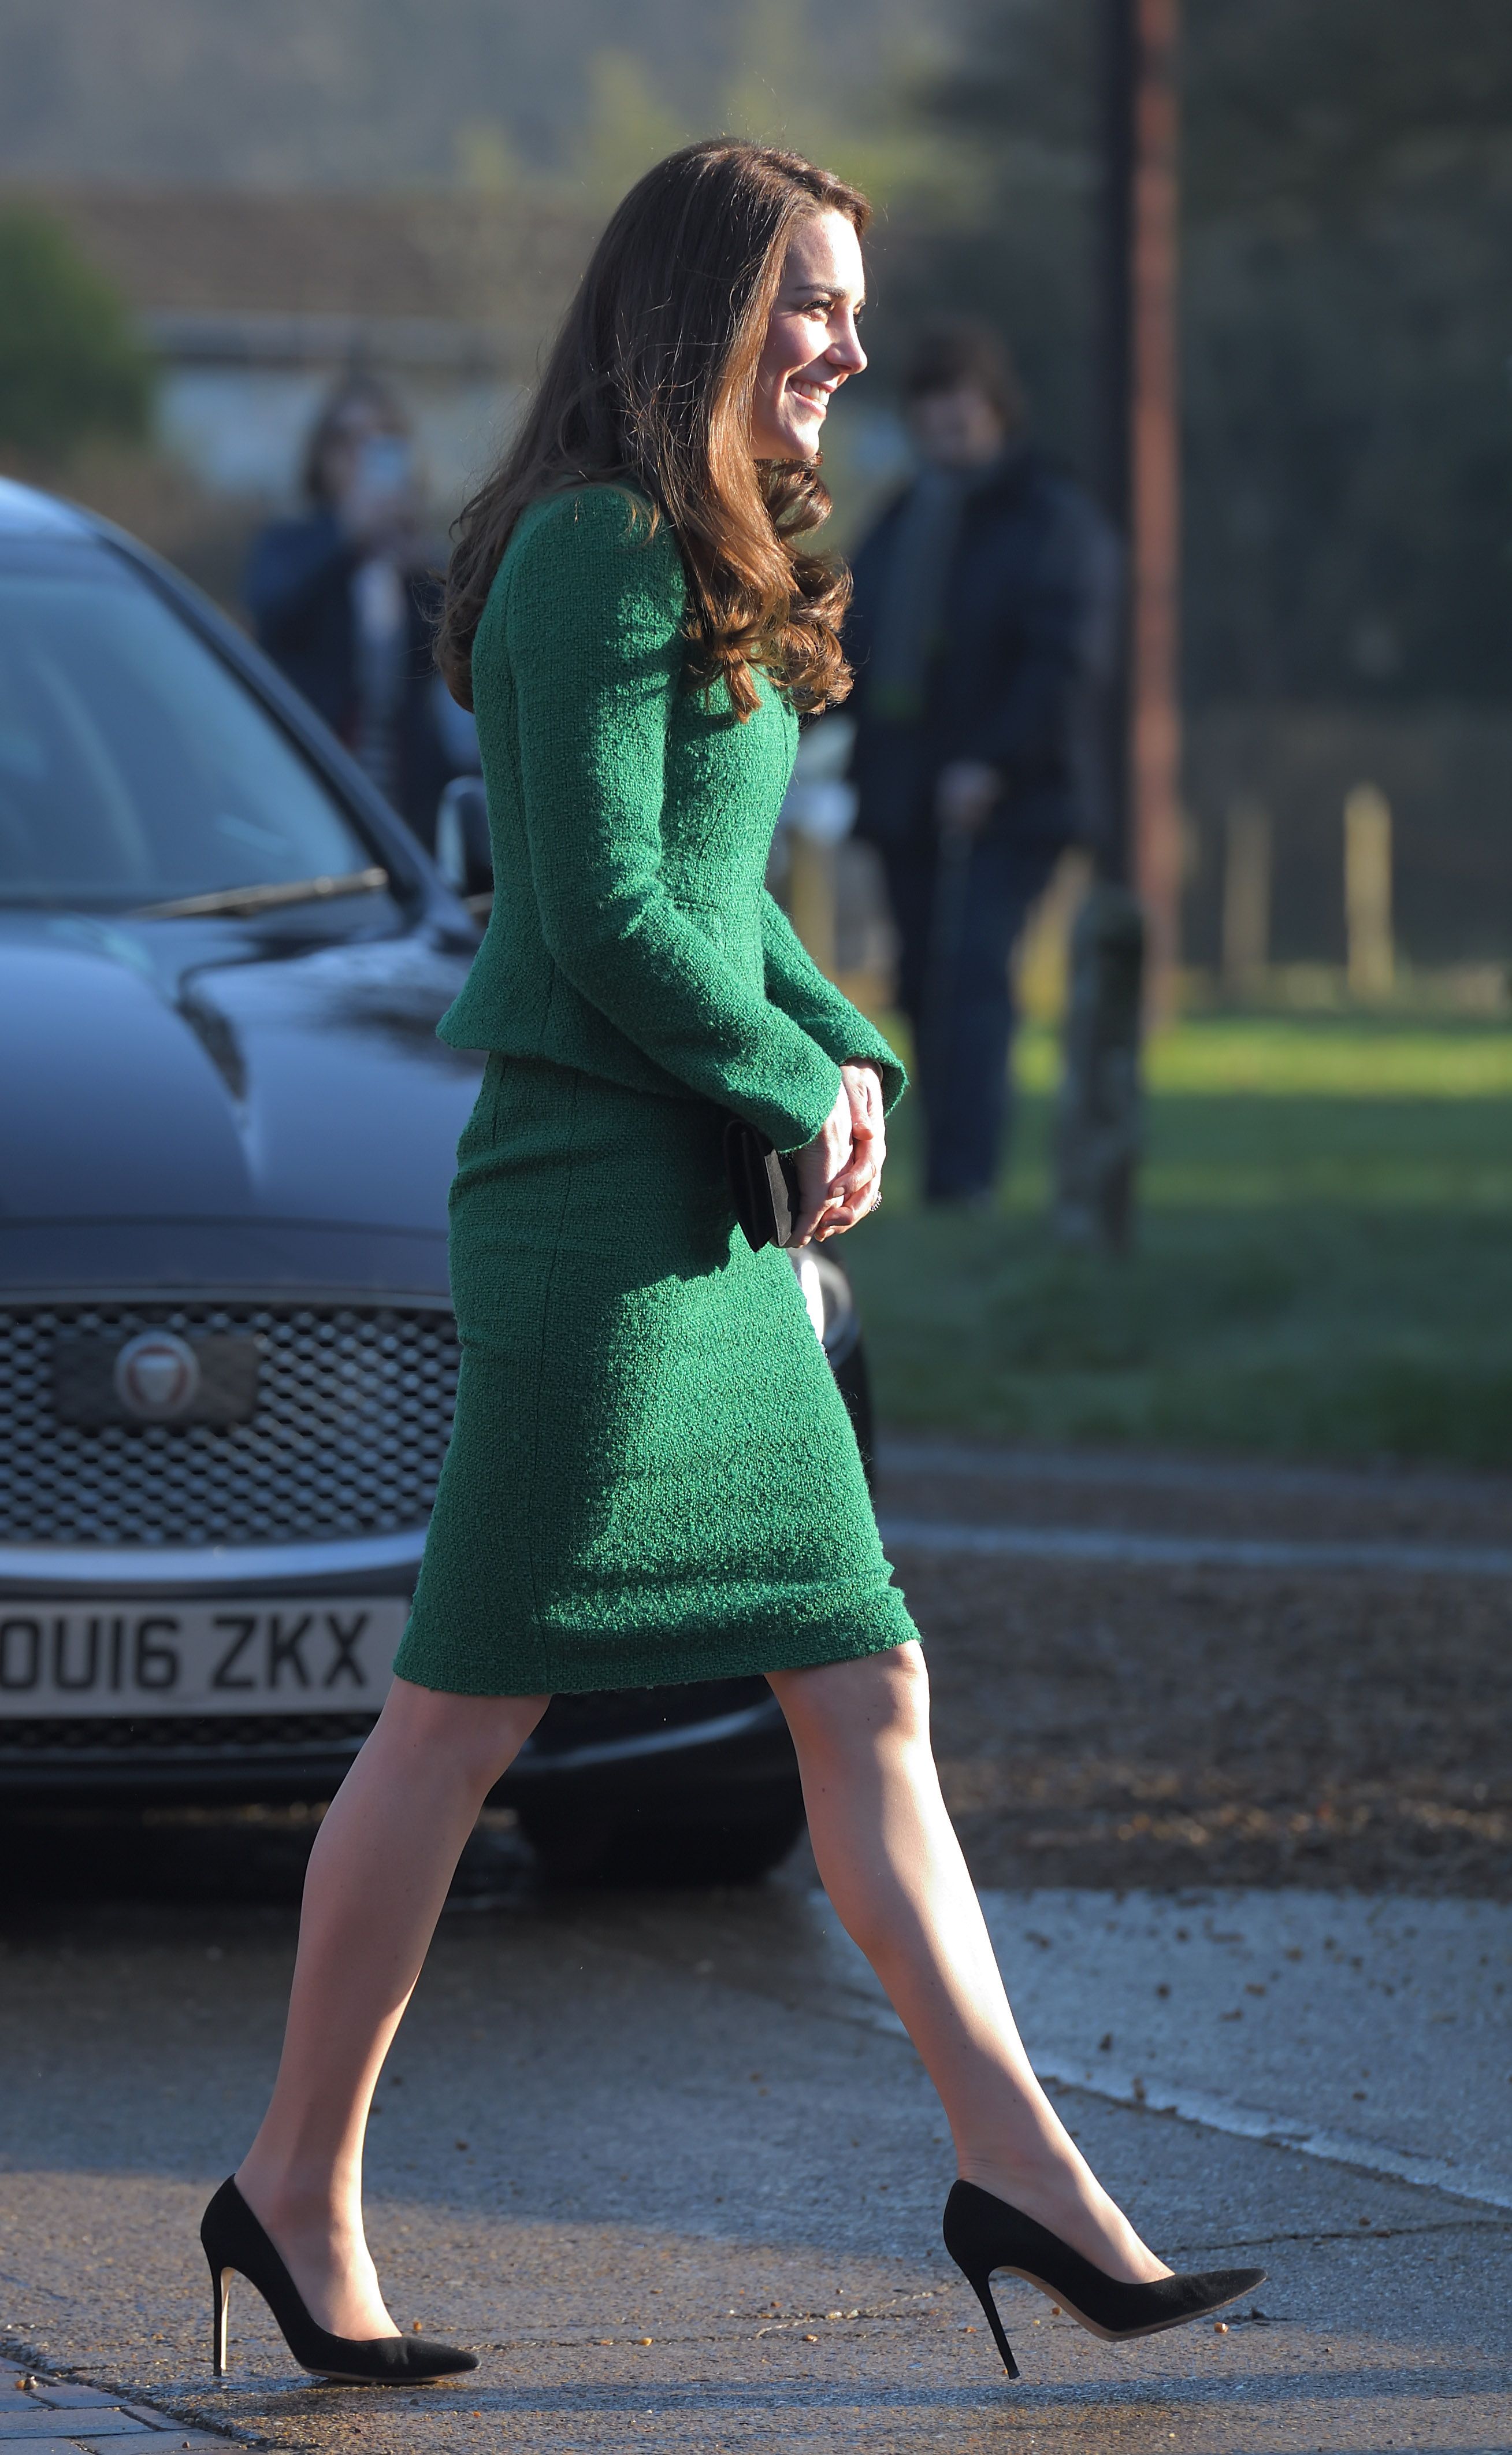 Kate Middleton's £6 fashion hack: How Princess of Wales wears